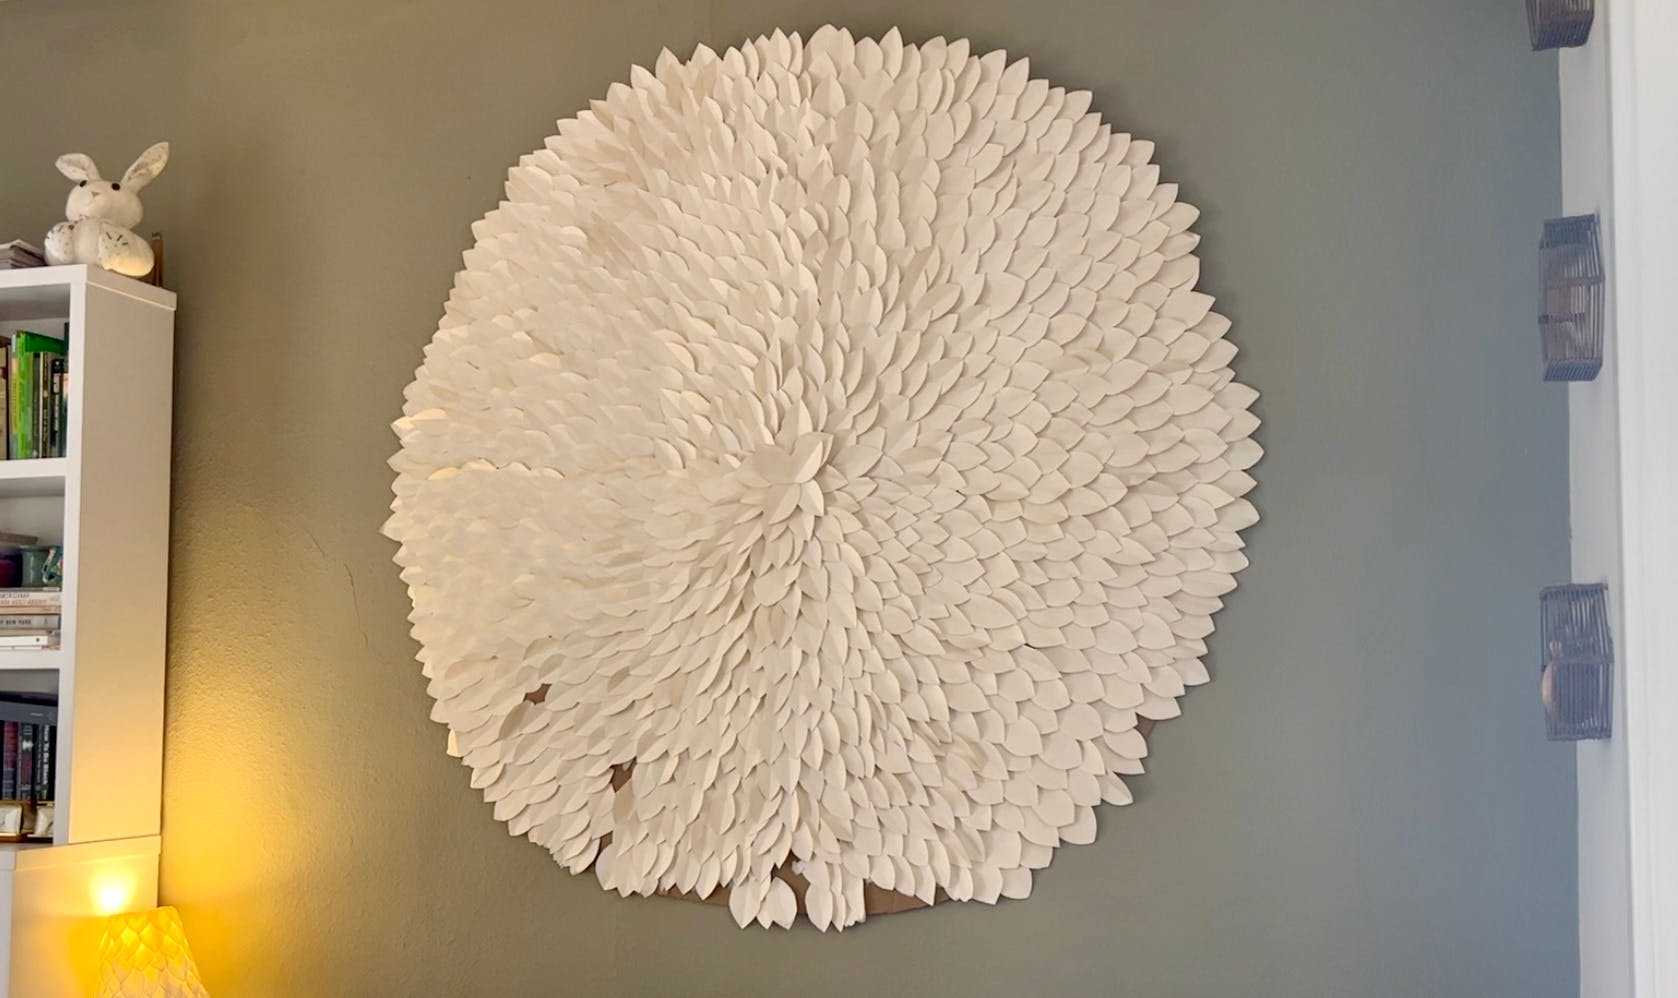 A large wall hanging of a multi-petaled flower made out of posterboard